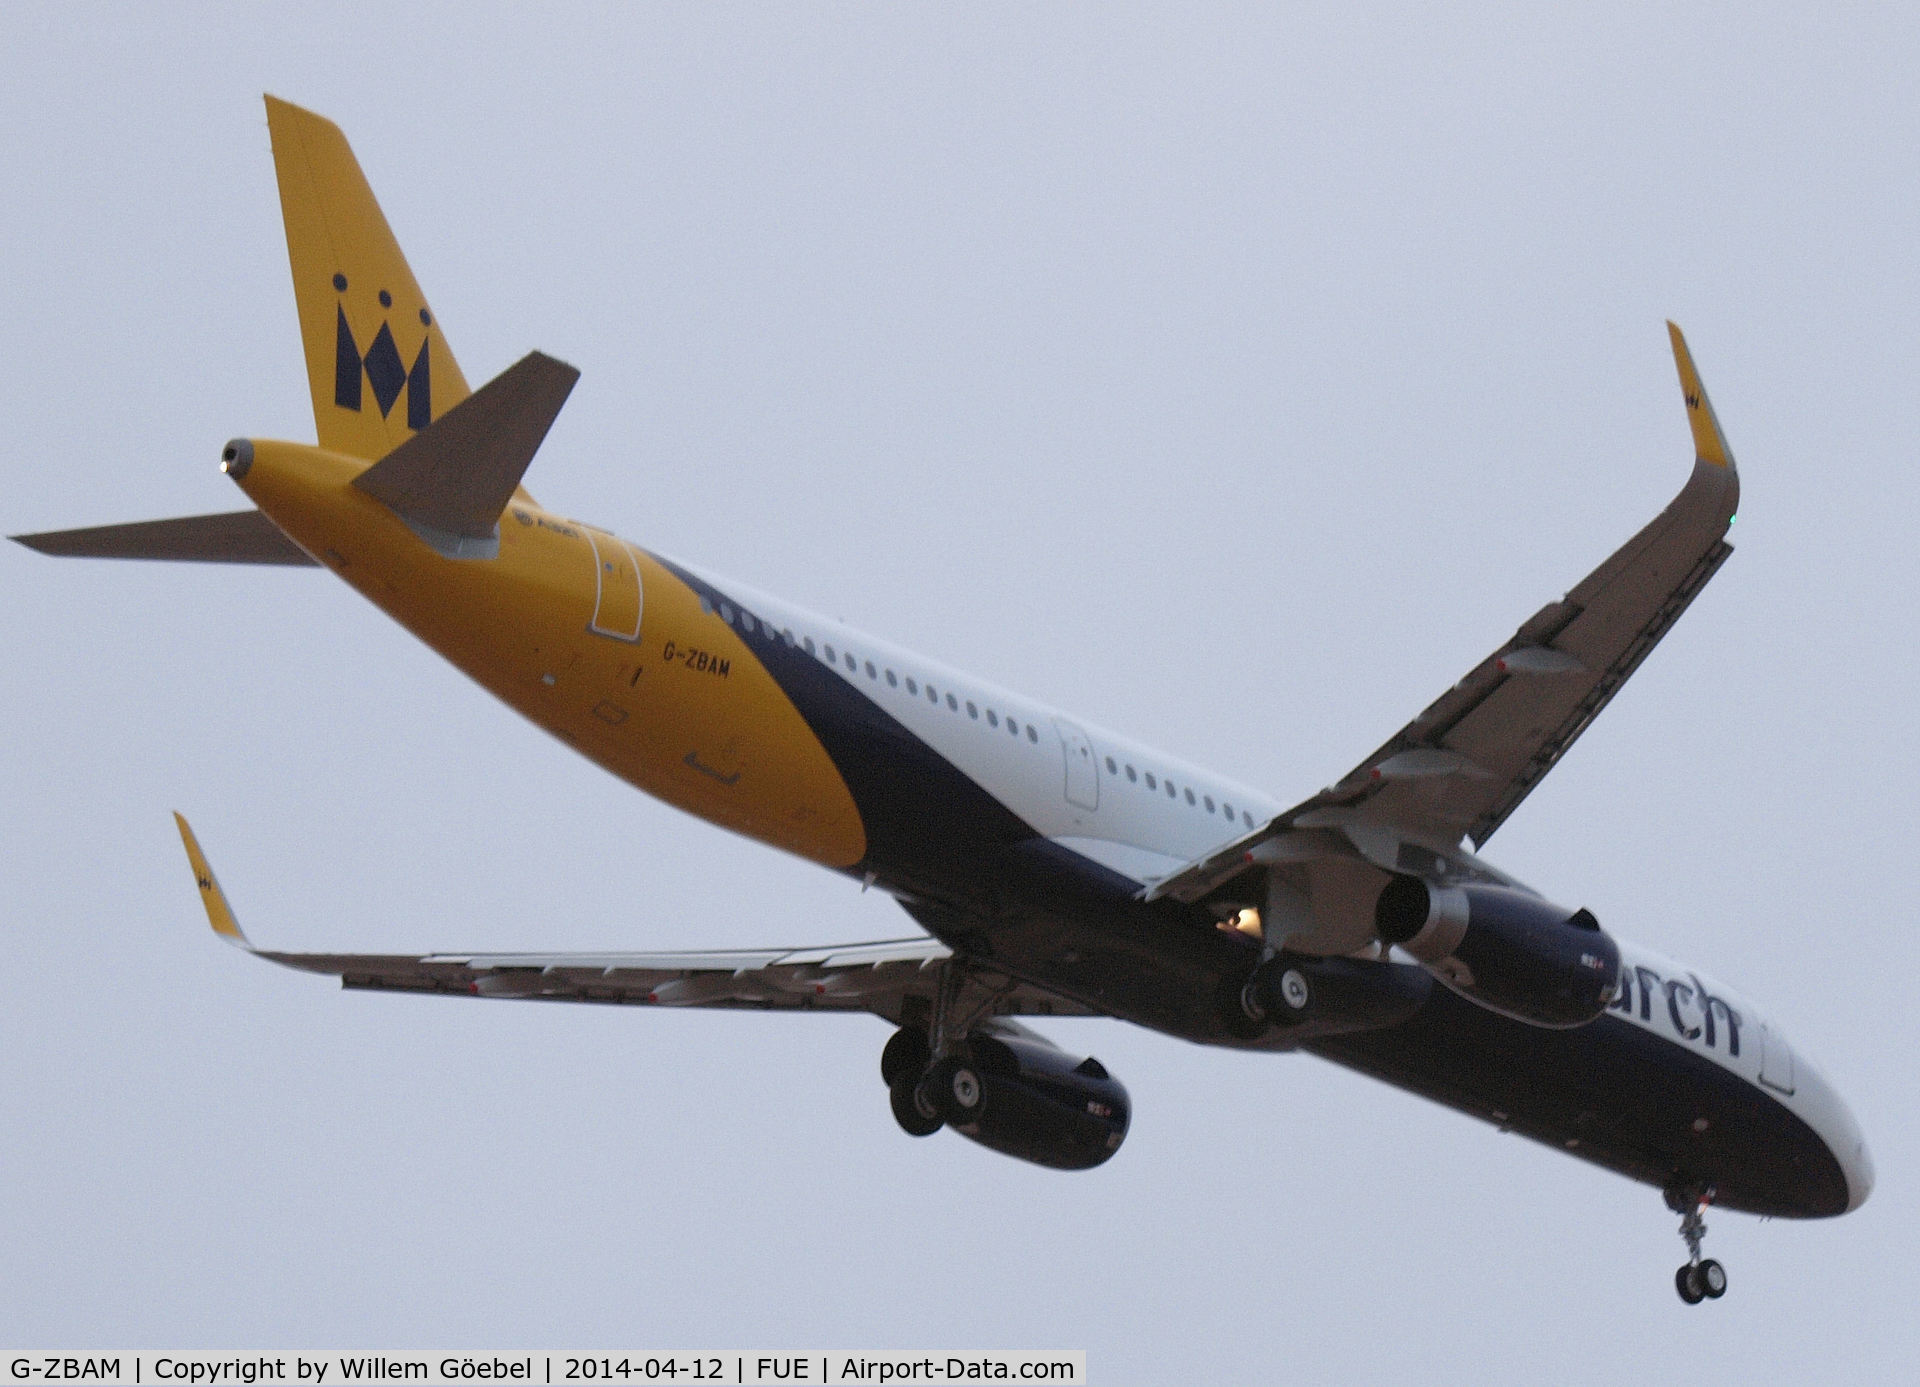 G-ZBAM, 2014 Airbus A321-231 C/N 6059, Prepare for landing on Airport of Fuertefentura